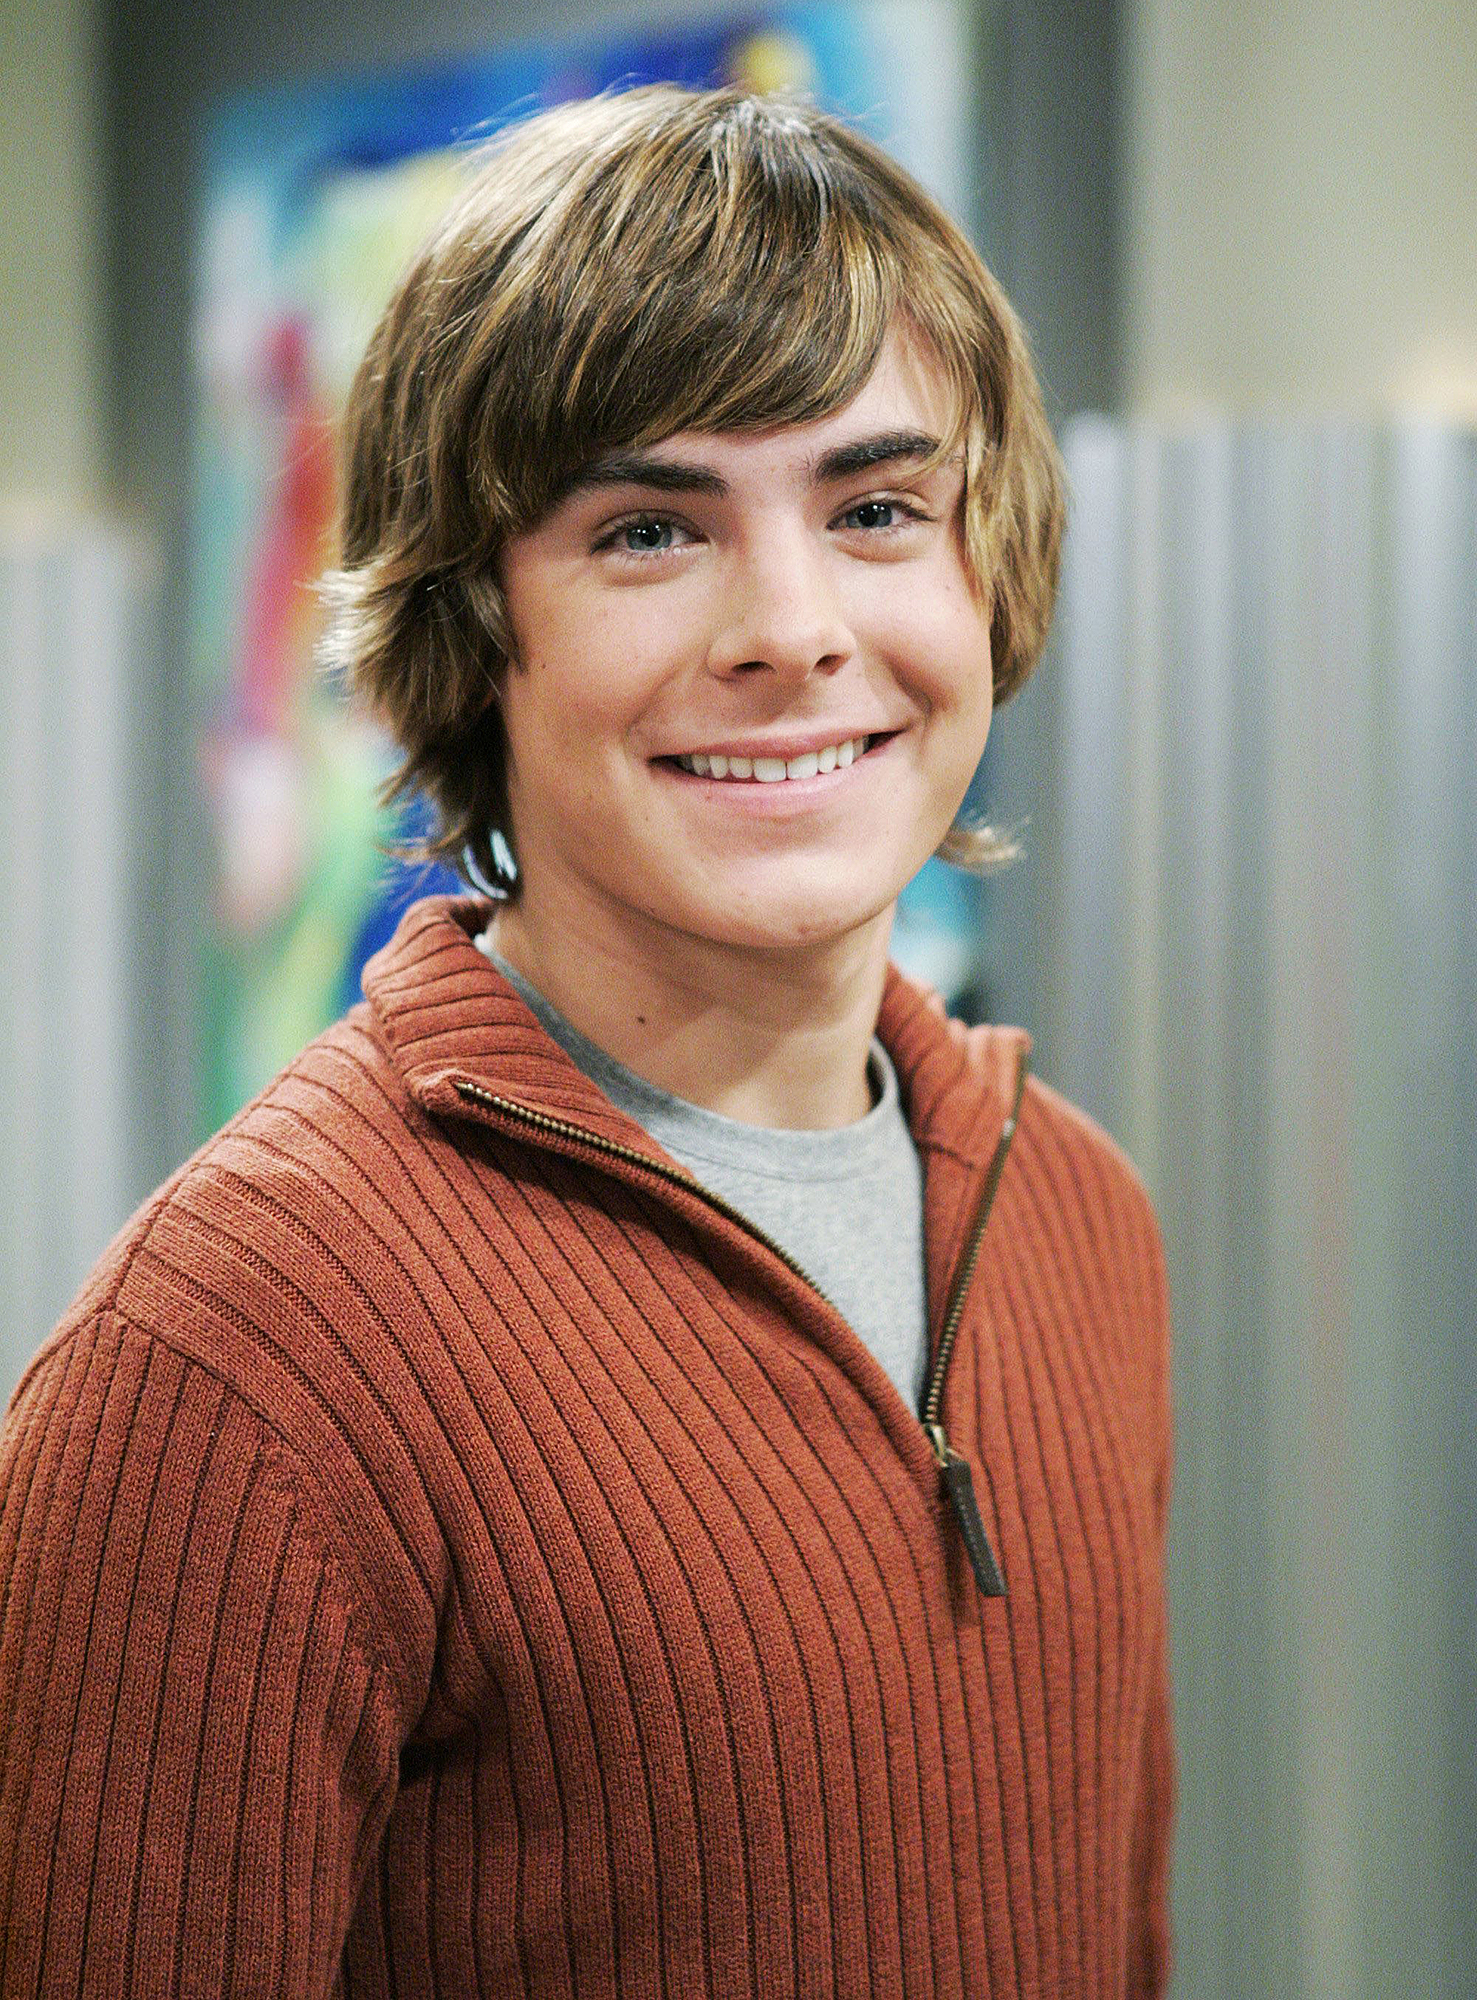 Zac-Efron-2005-The-Suite-Life-Of-Zack-and-Cody